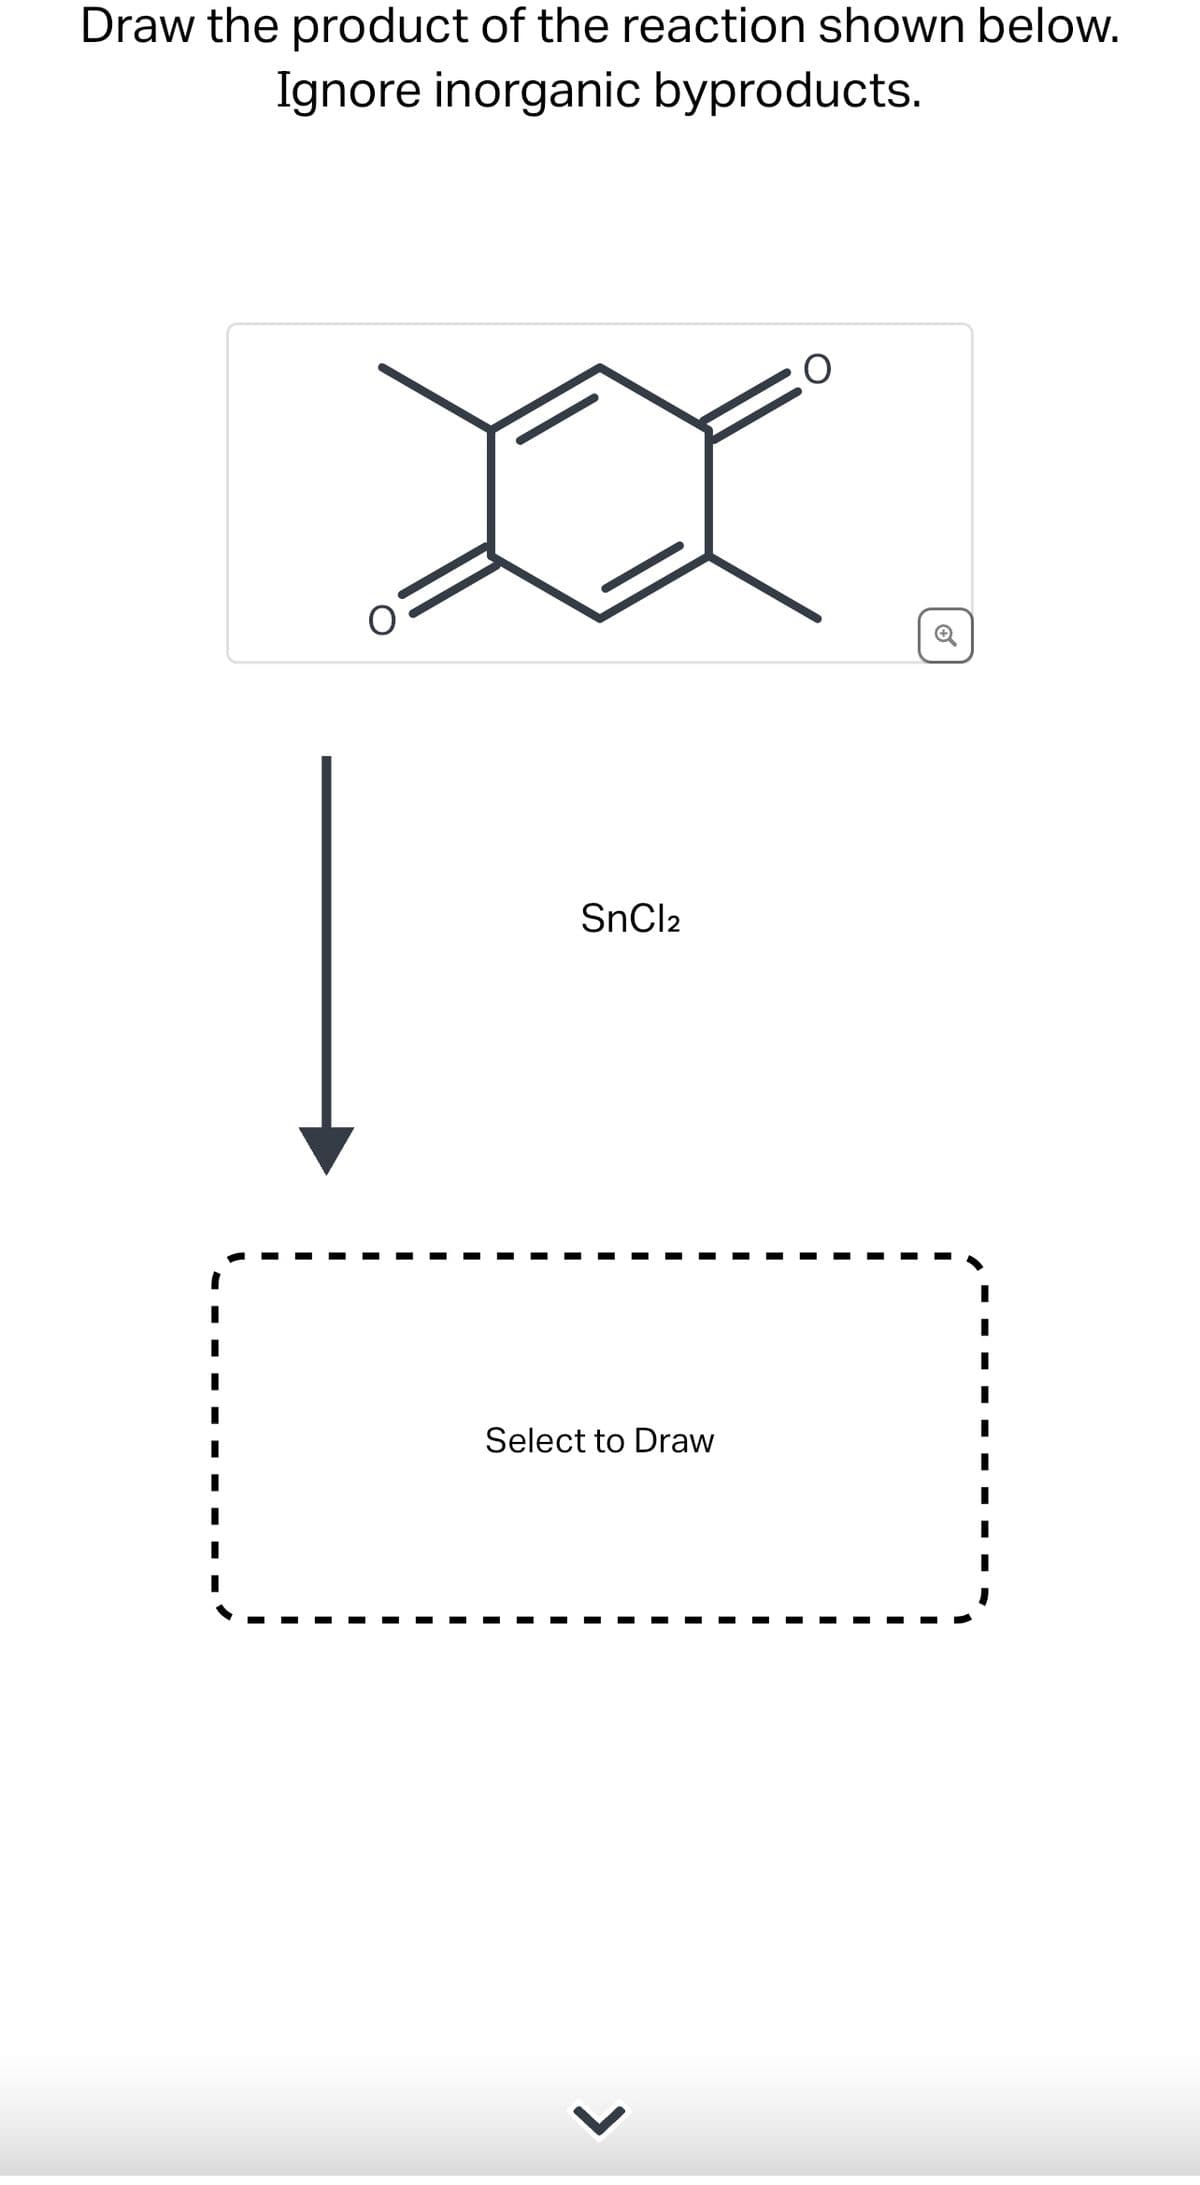 Draw the product of the reaction shown below.
Ignore inorganic byproducts.
SnCl2
Select to Draw
>
O